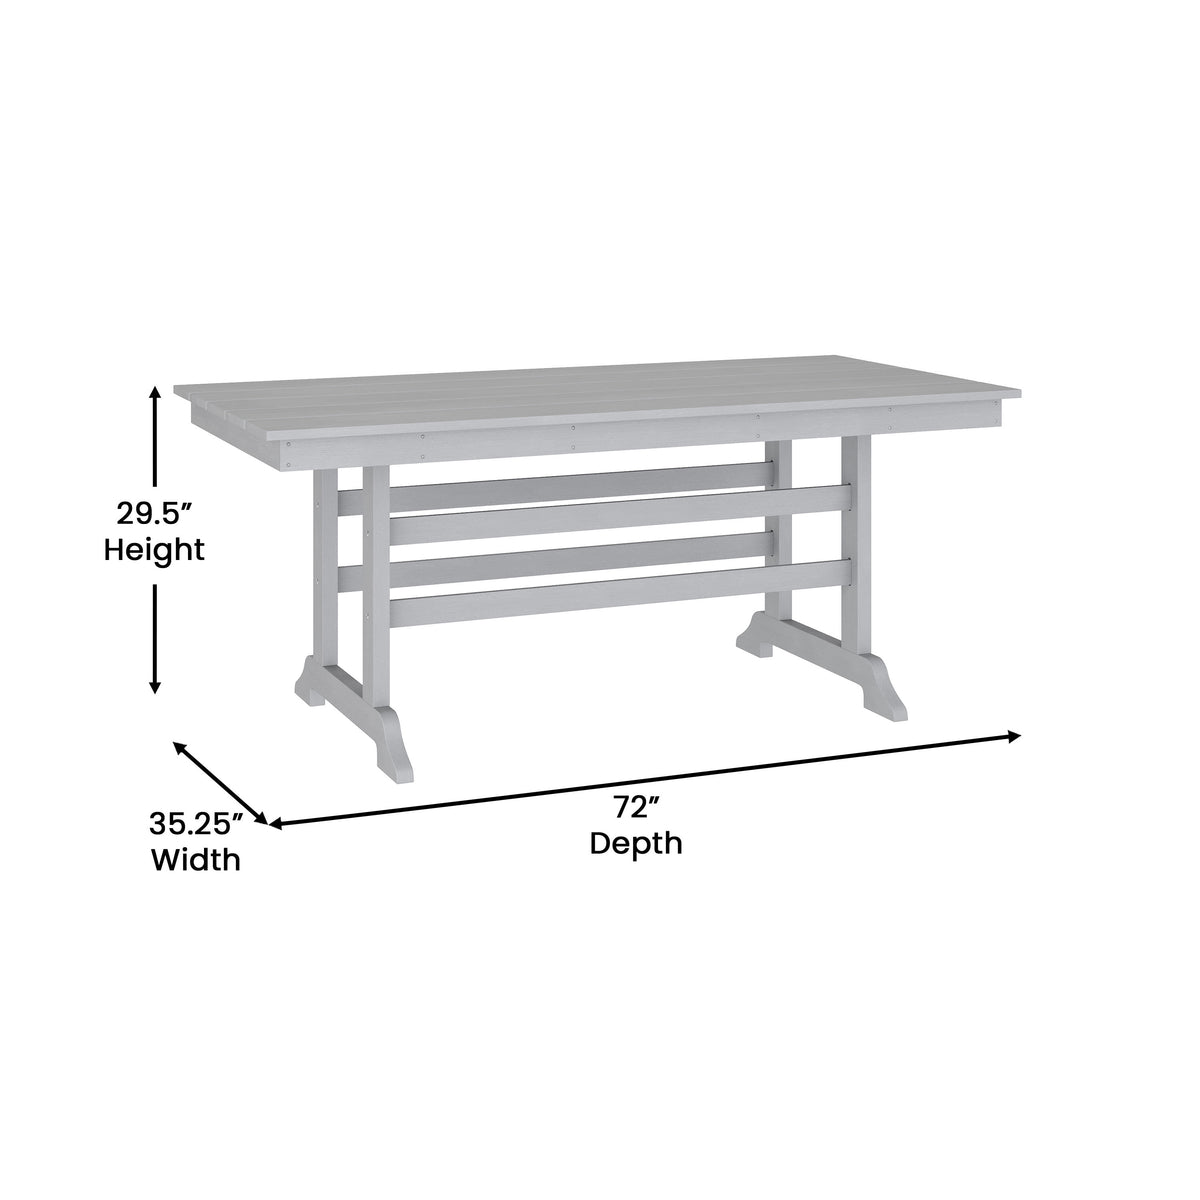 Gray |#| Commercial Grade Indoor-Outdoor 72" Rectangle Adirondack Style Table in Black